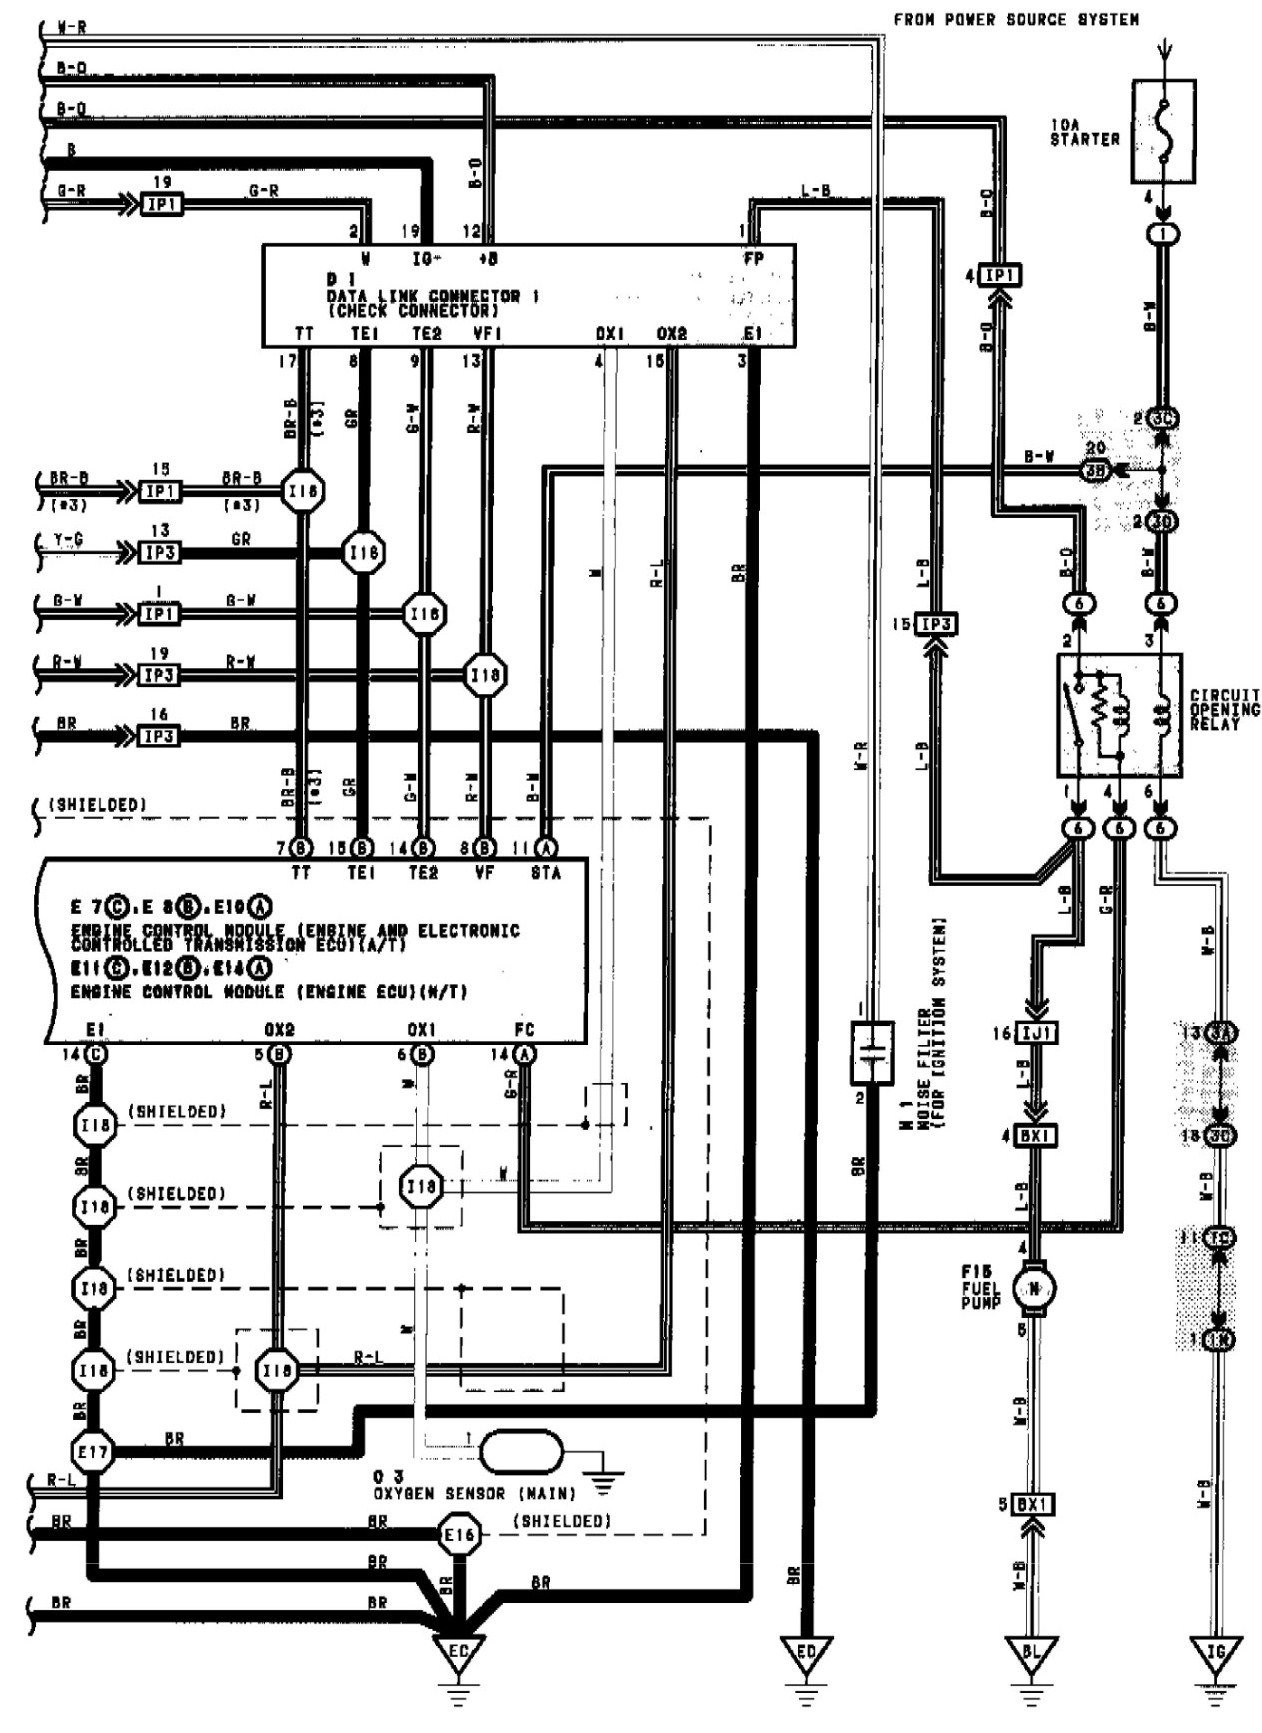 1993 toyota Camry Engine Diagram 1990 toyota Camry Stereo Wiring Diagram Shahsramblings Of 1993 toyota Camry Engine Diagram